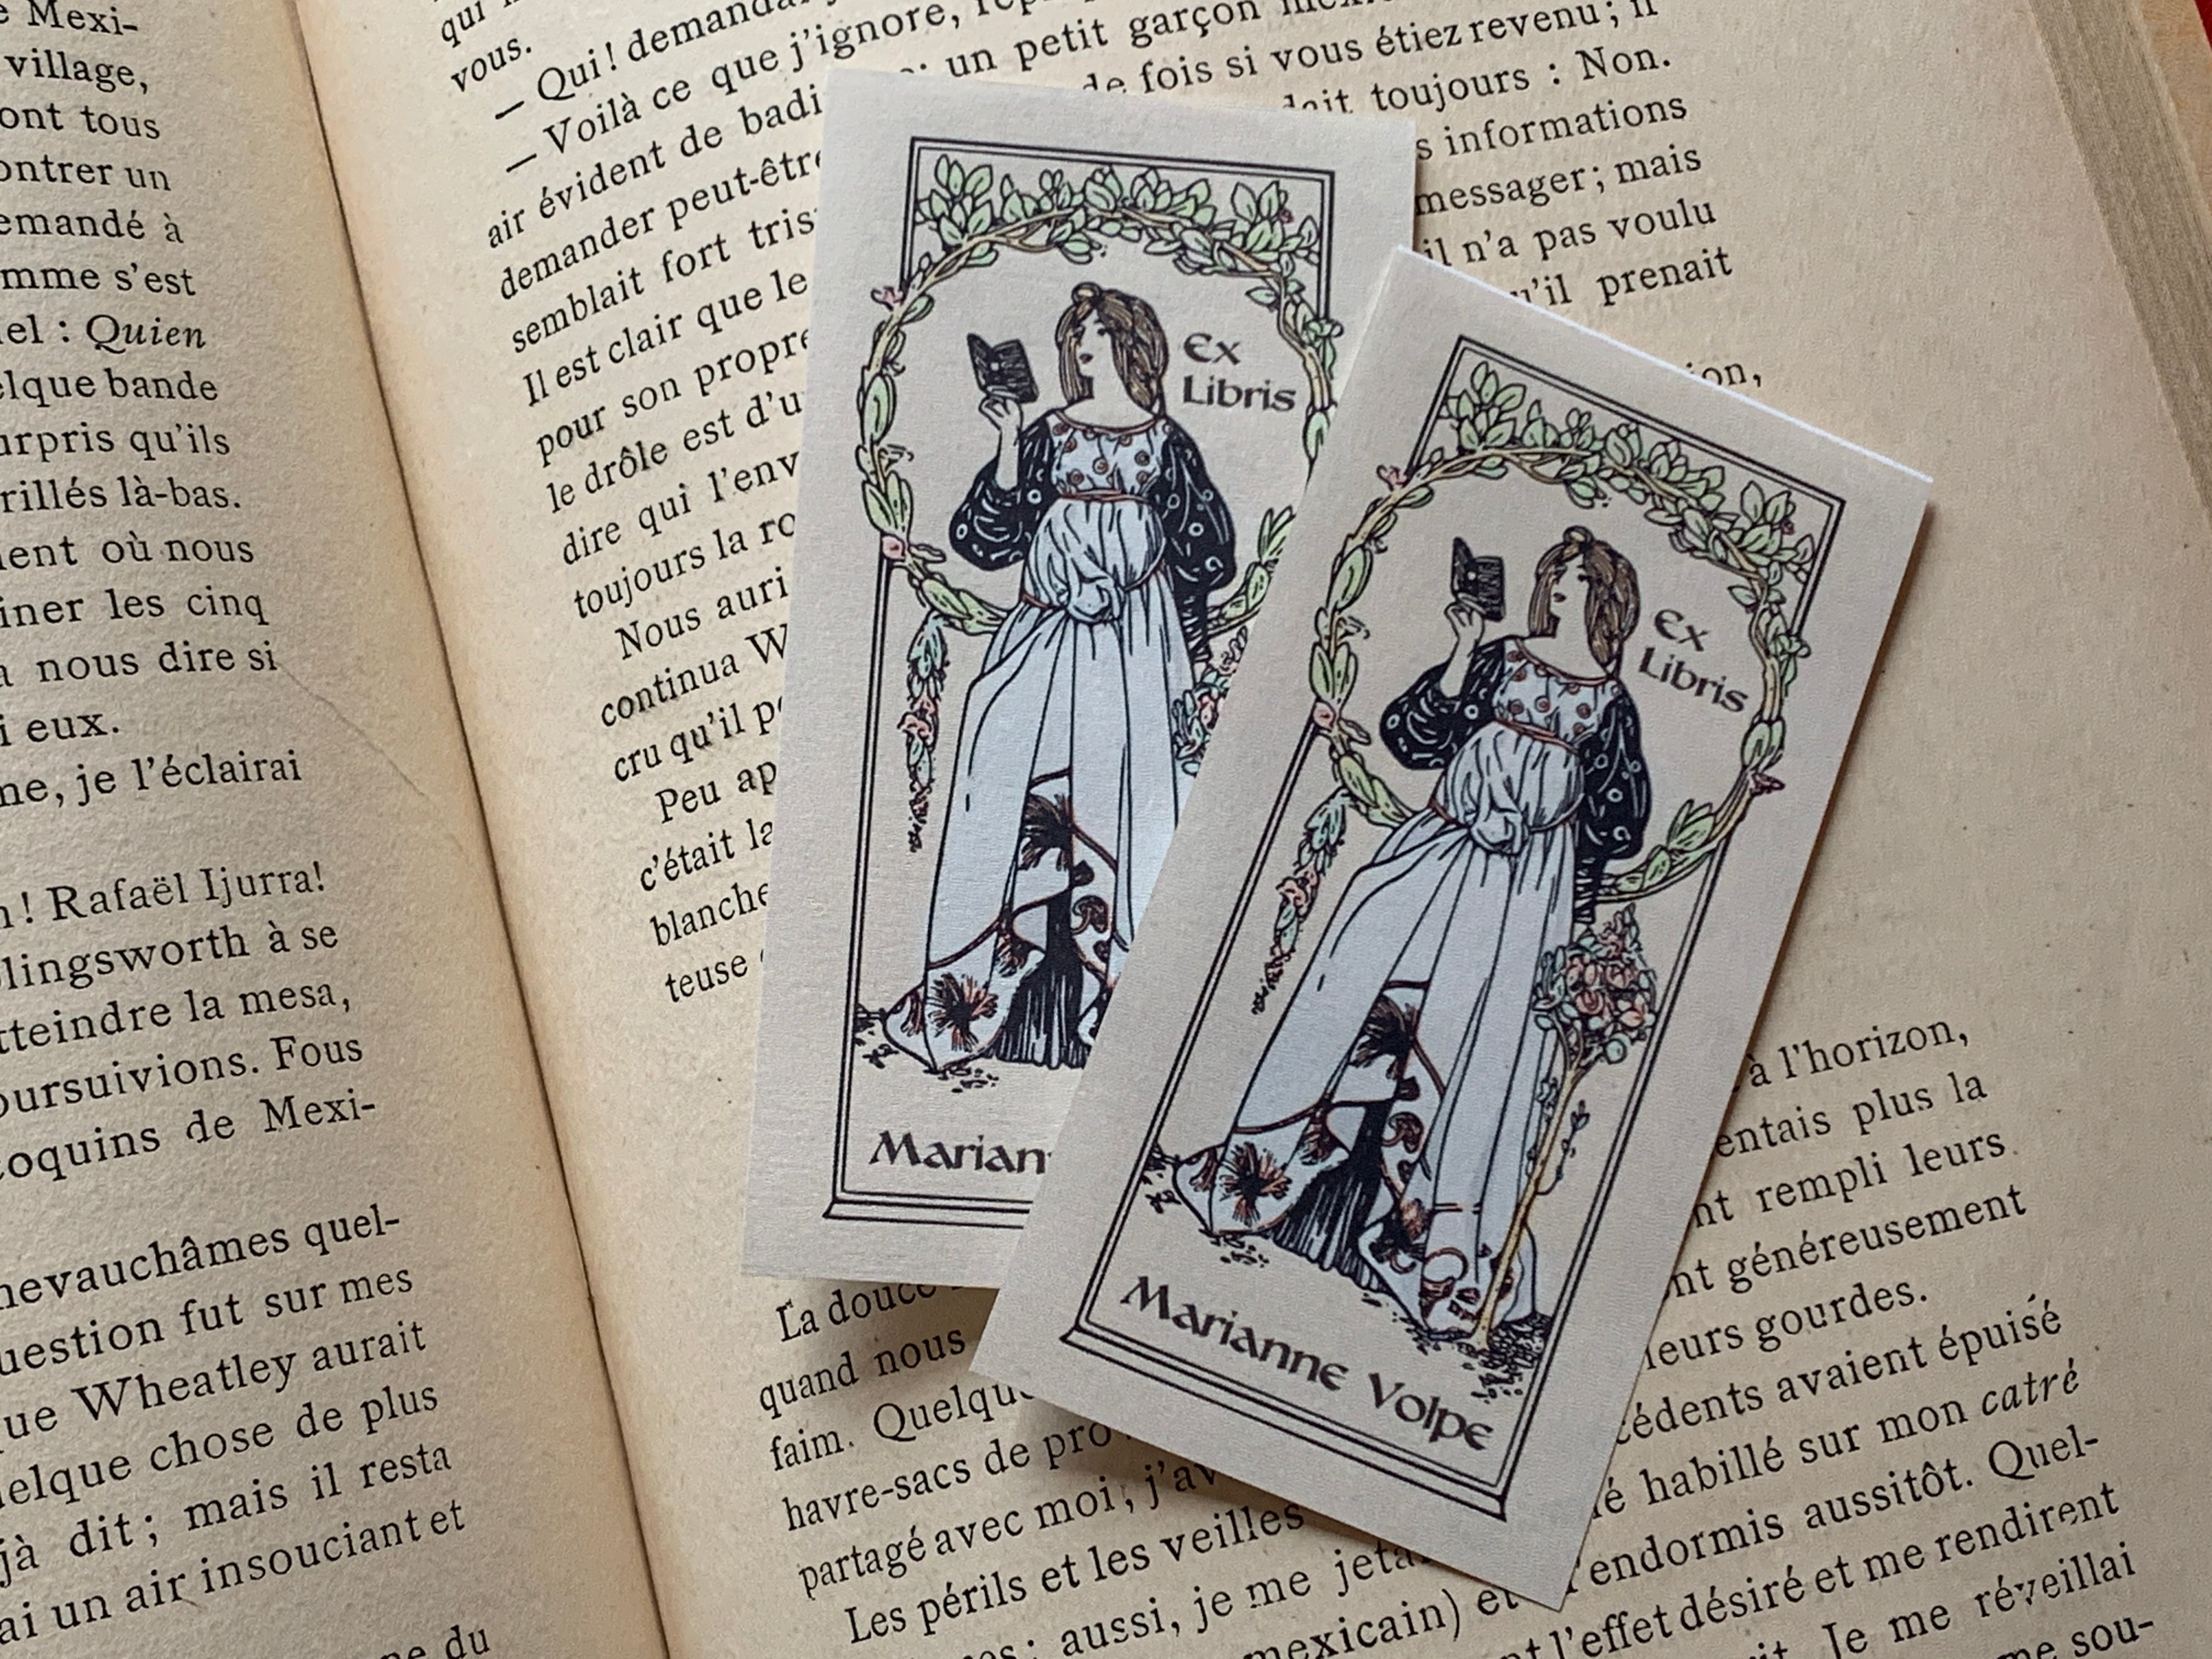 Spring Maiden, Personalized Ex-Libris Bookplates, Crafted on Traditional Gummed Paper, 2in x 4in, Set of 30